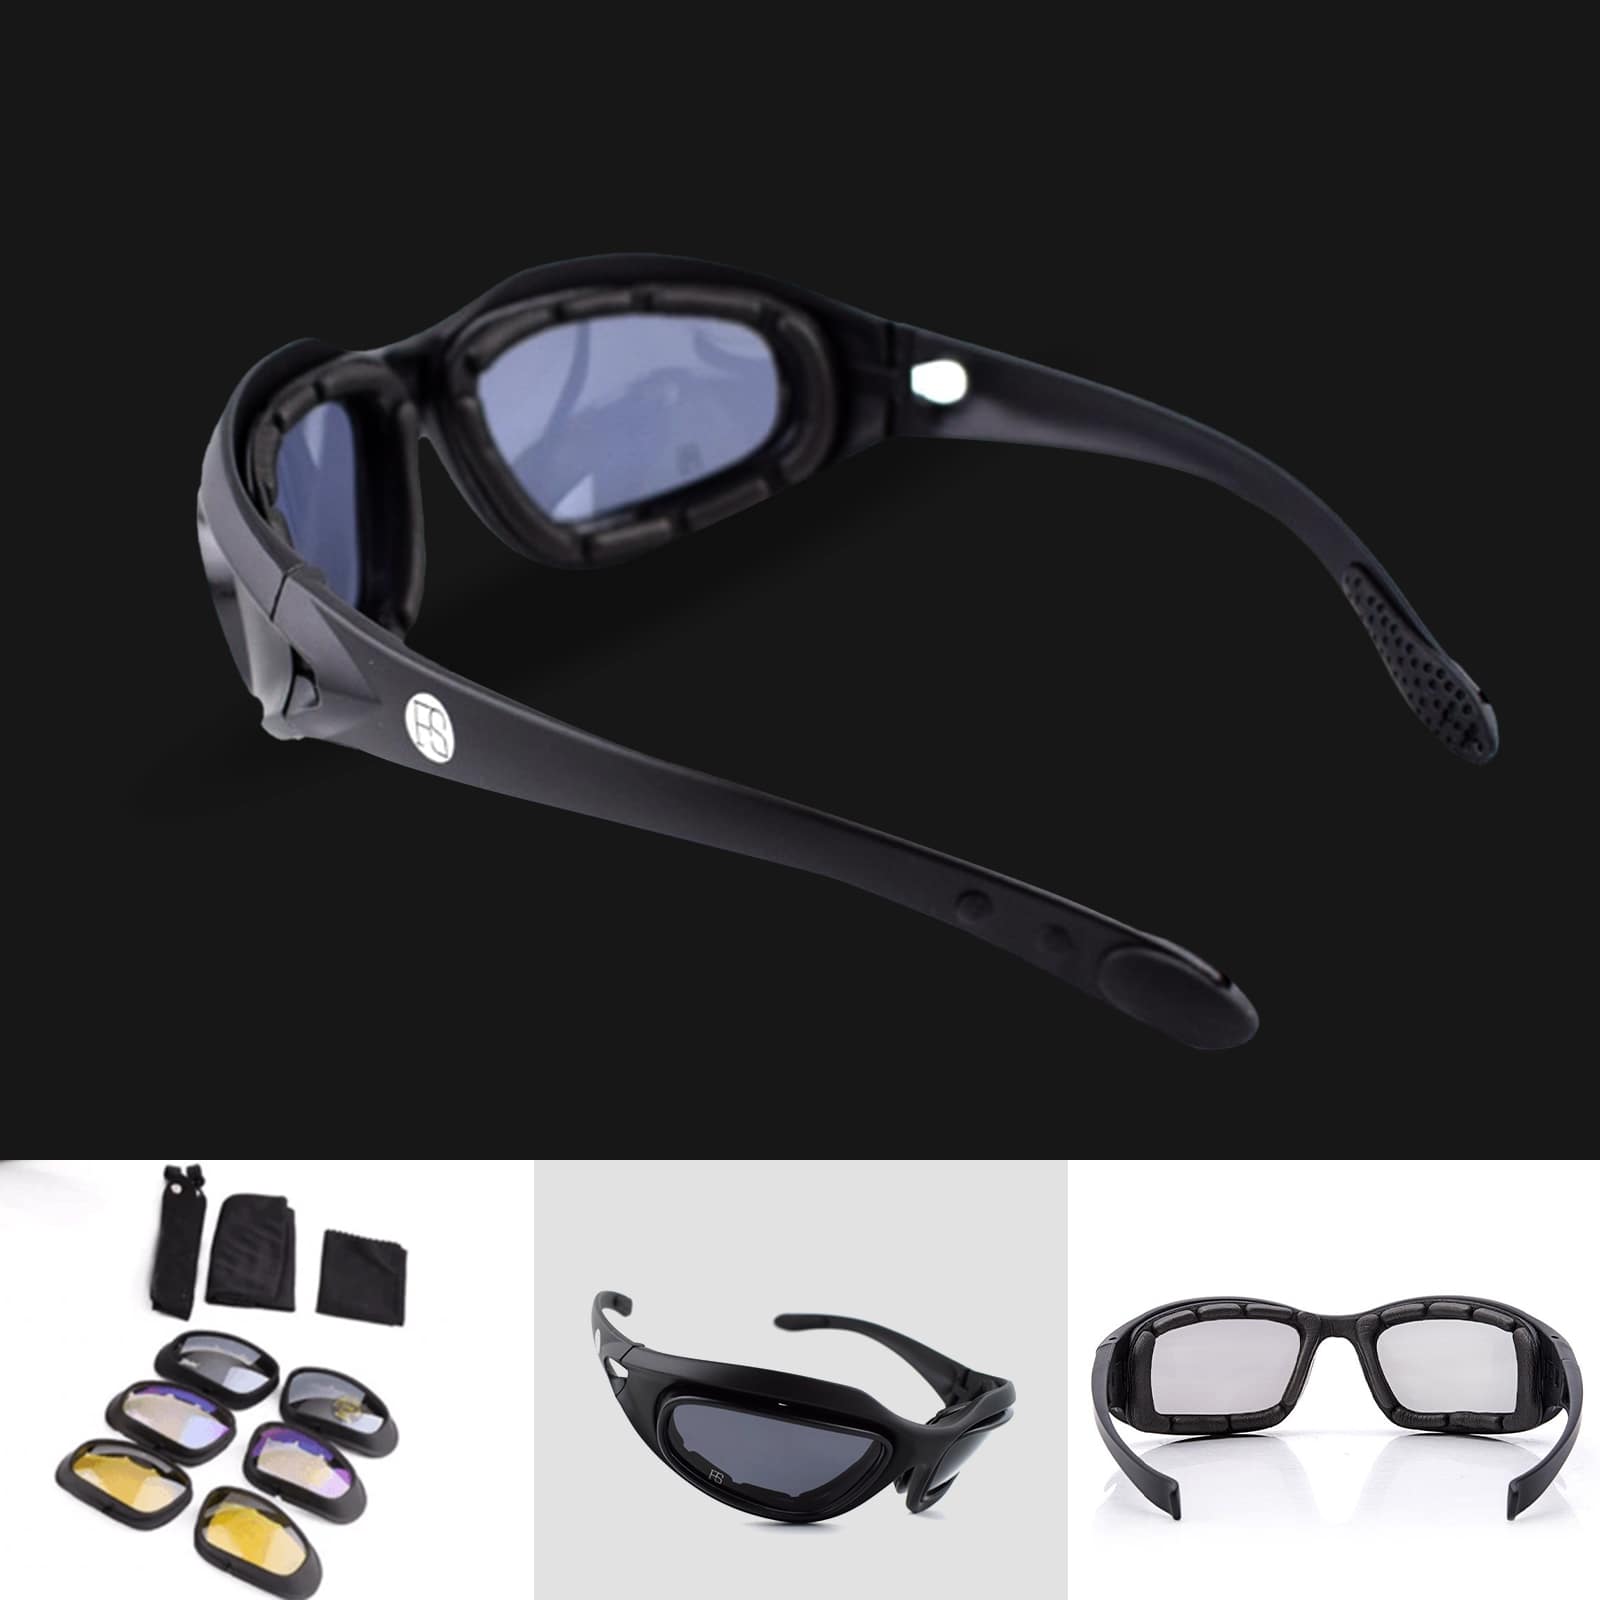 Daisy C6 Ballistic' Polarized Motorcycle Glasses *(Our Top Pick